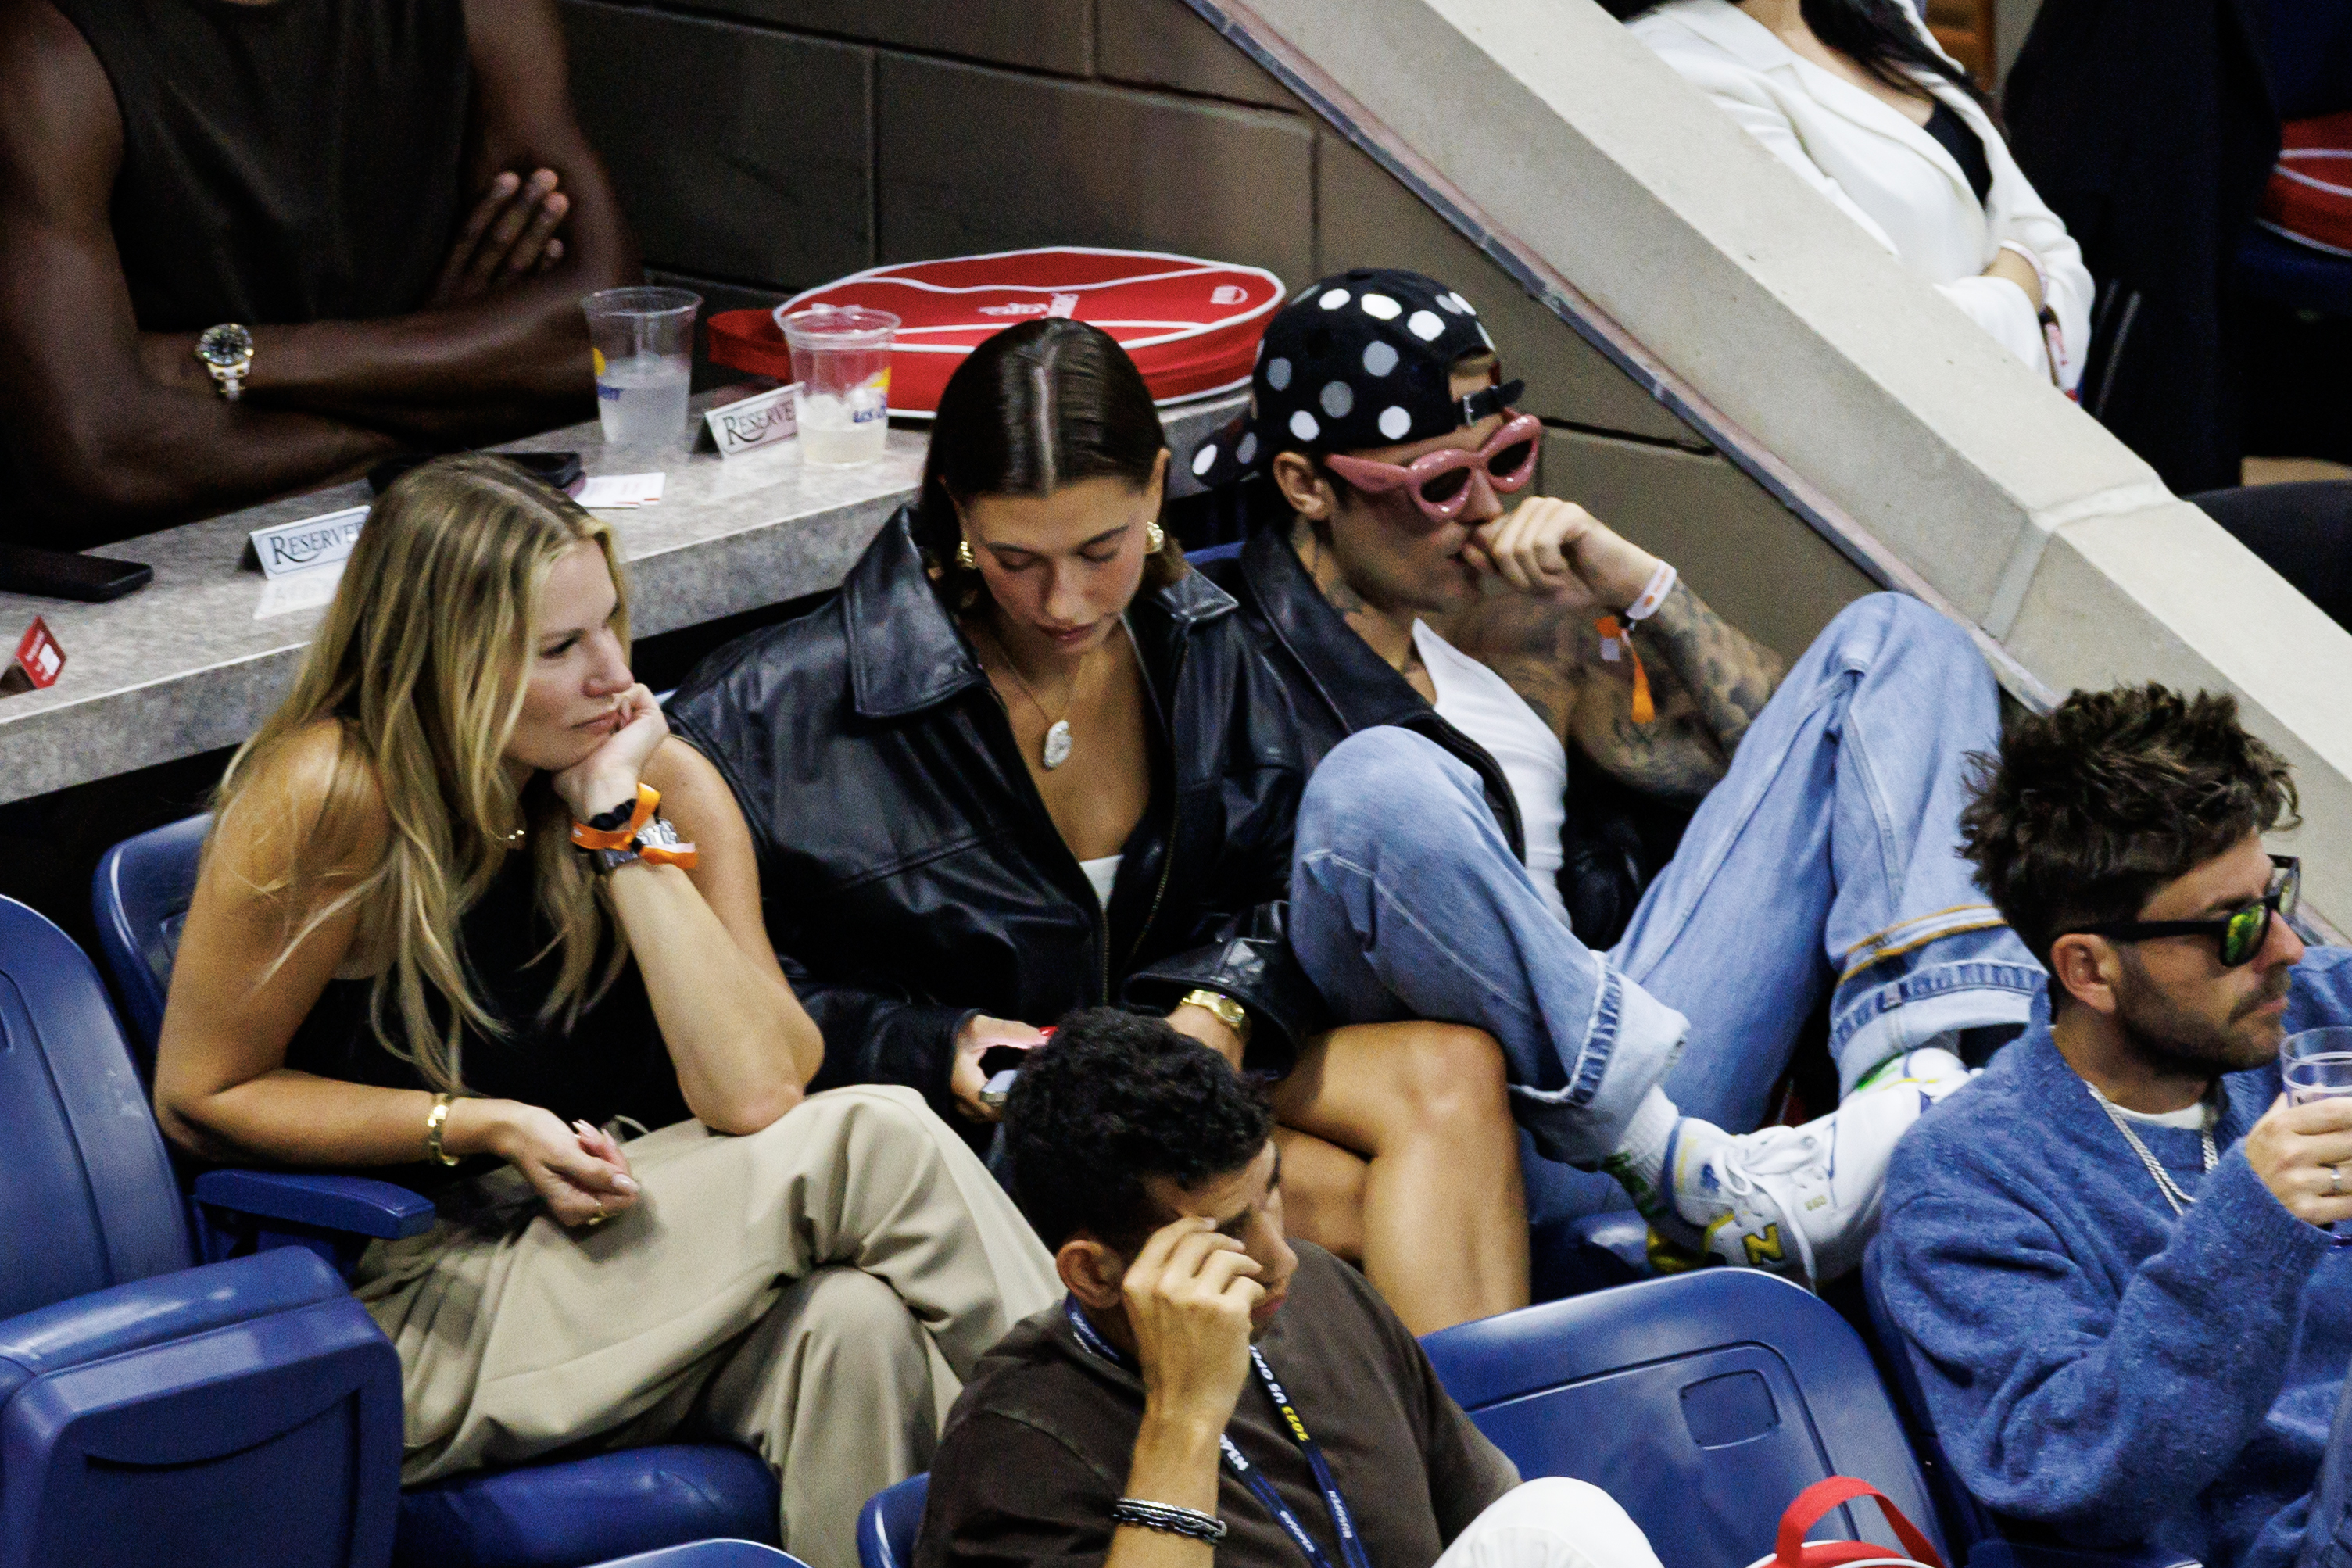 hailey and justin sitting with friends at a sports event